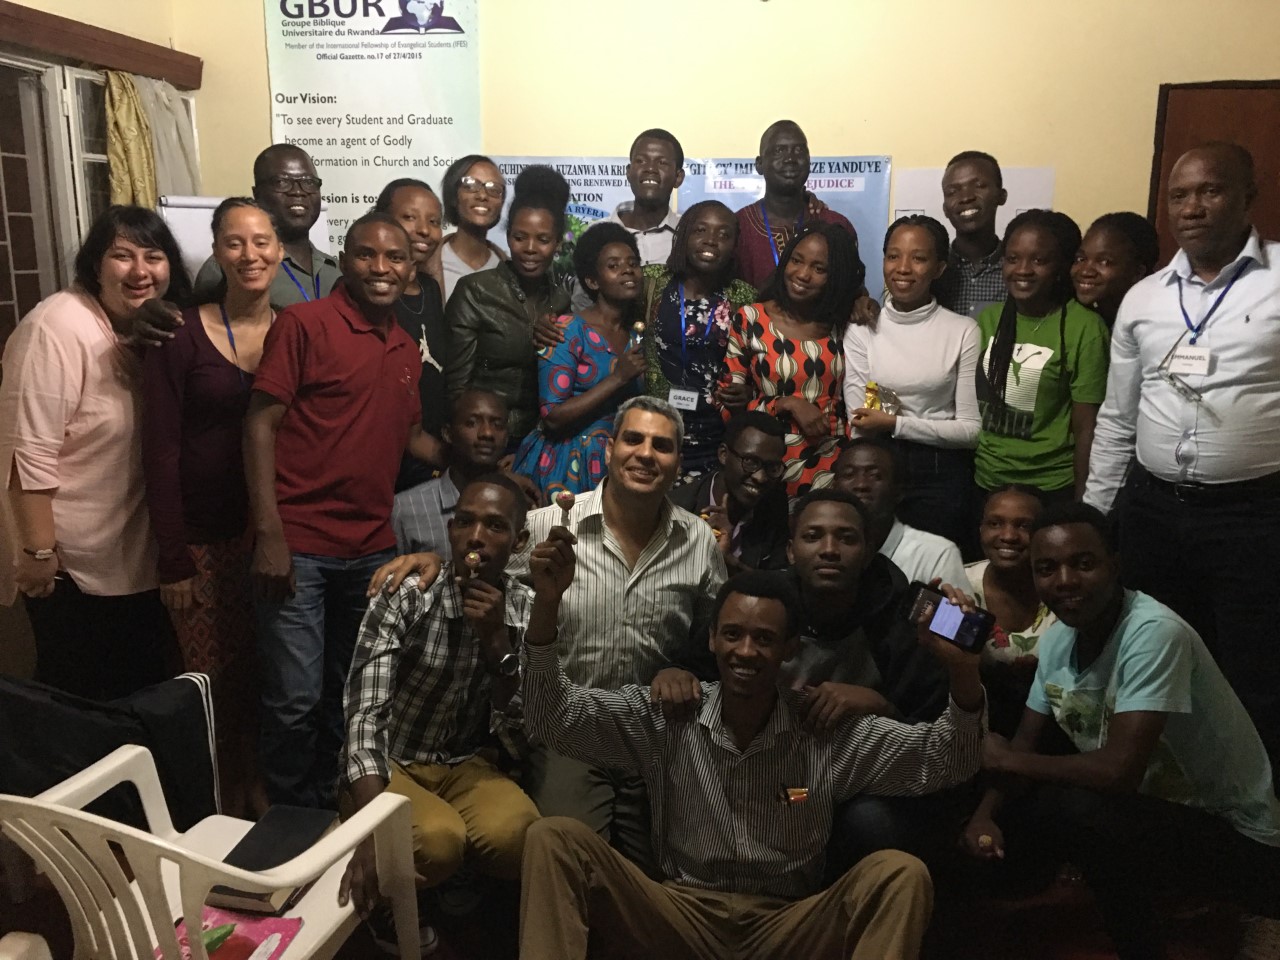 Michael helped facilitate a workshop for university students in Rwanda as his practicum (he is the tallest one in the back row).